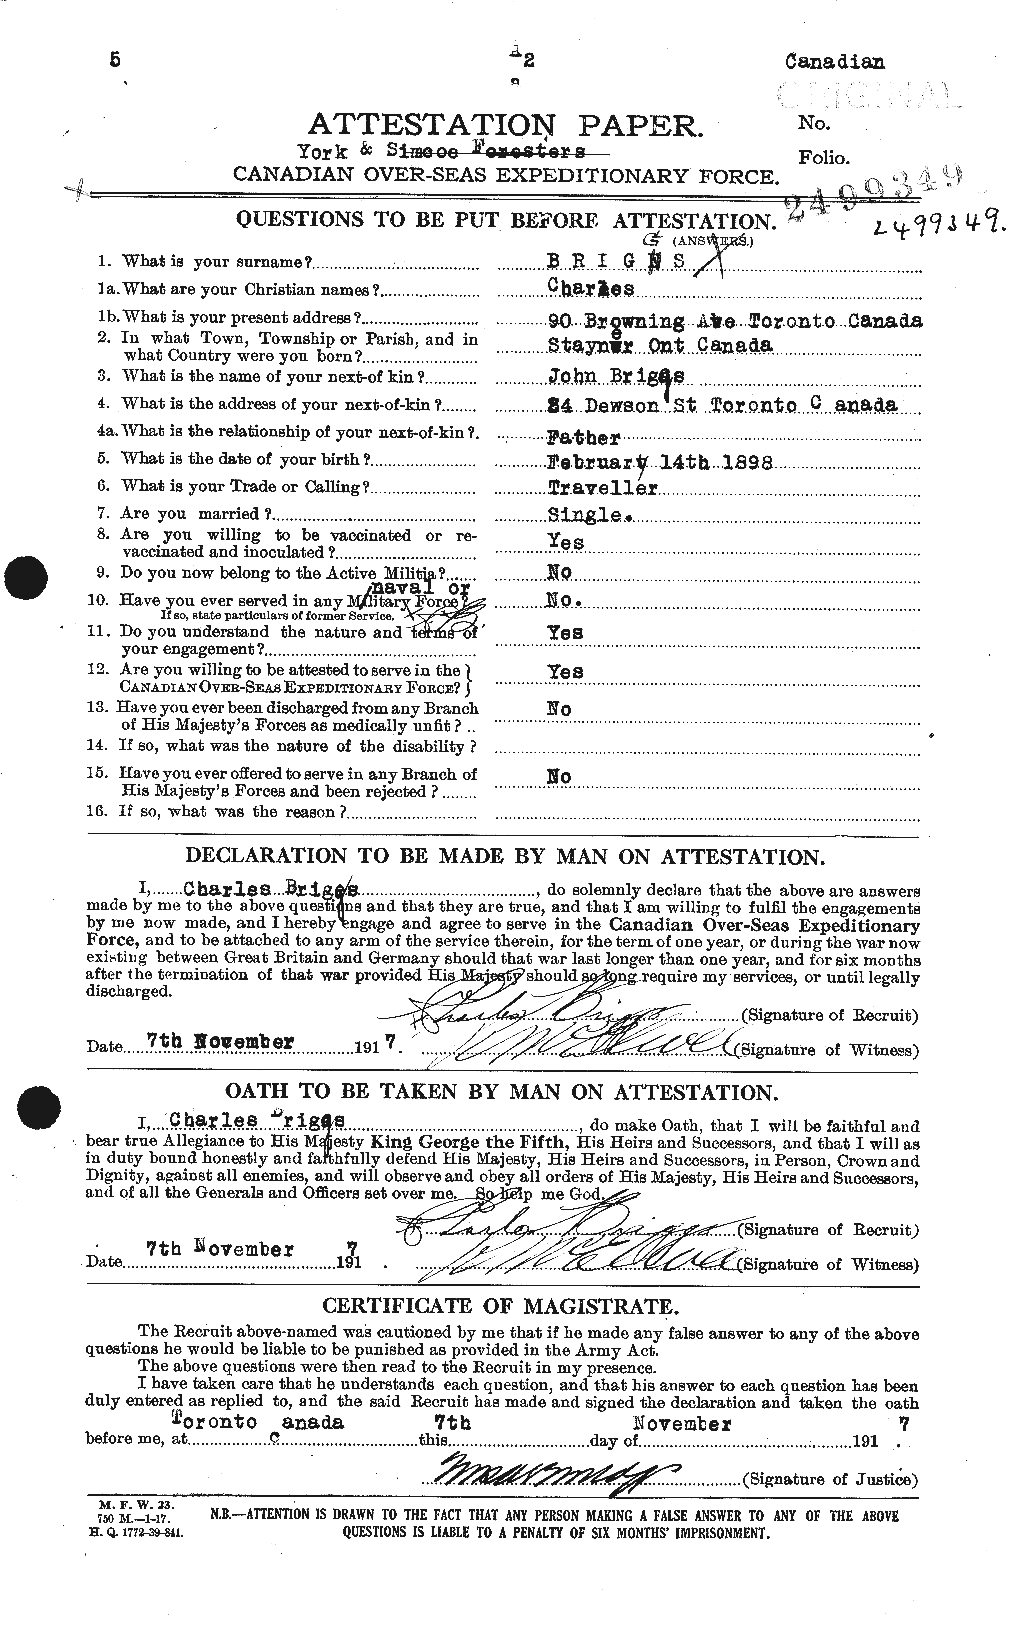 Personnel Records of the First World War - CEF 263977a